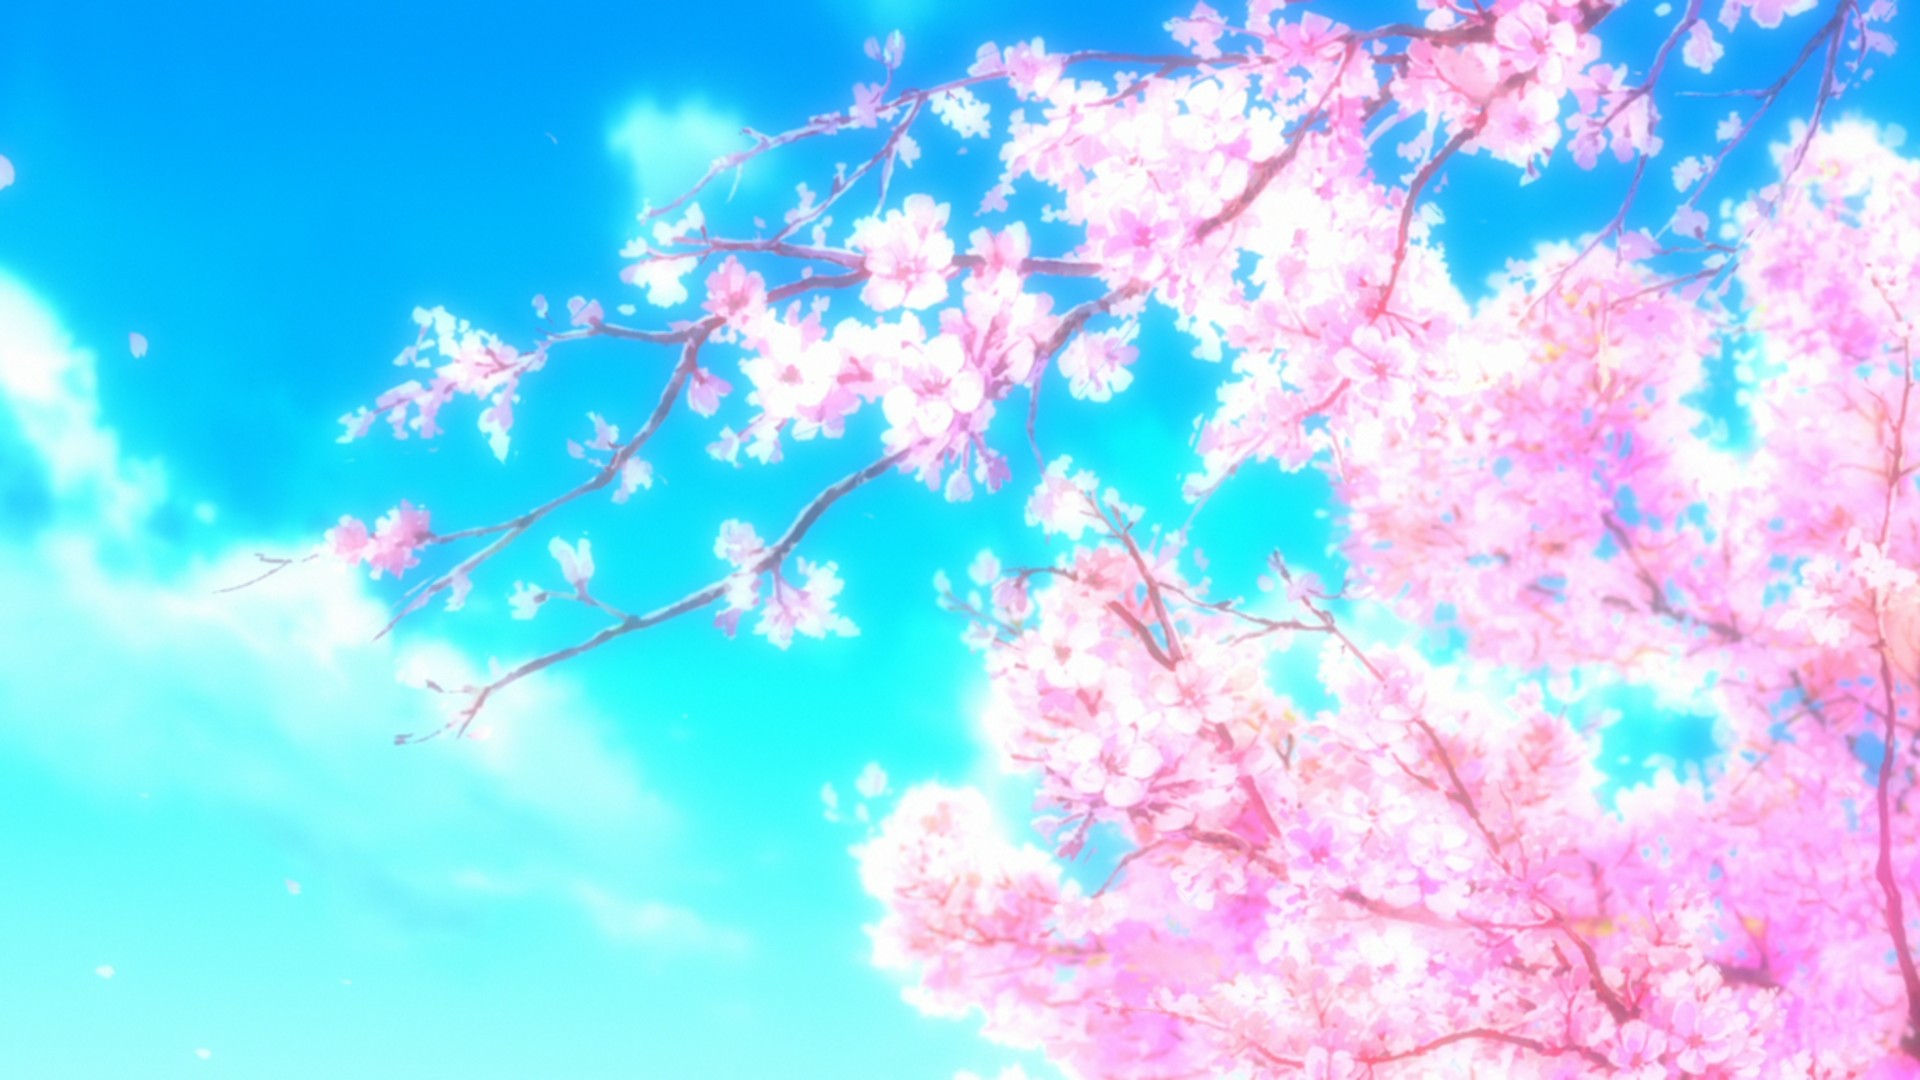 Anime wallpaper ·① Download free HD anime wallpapers for ...